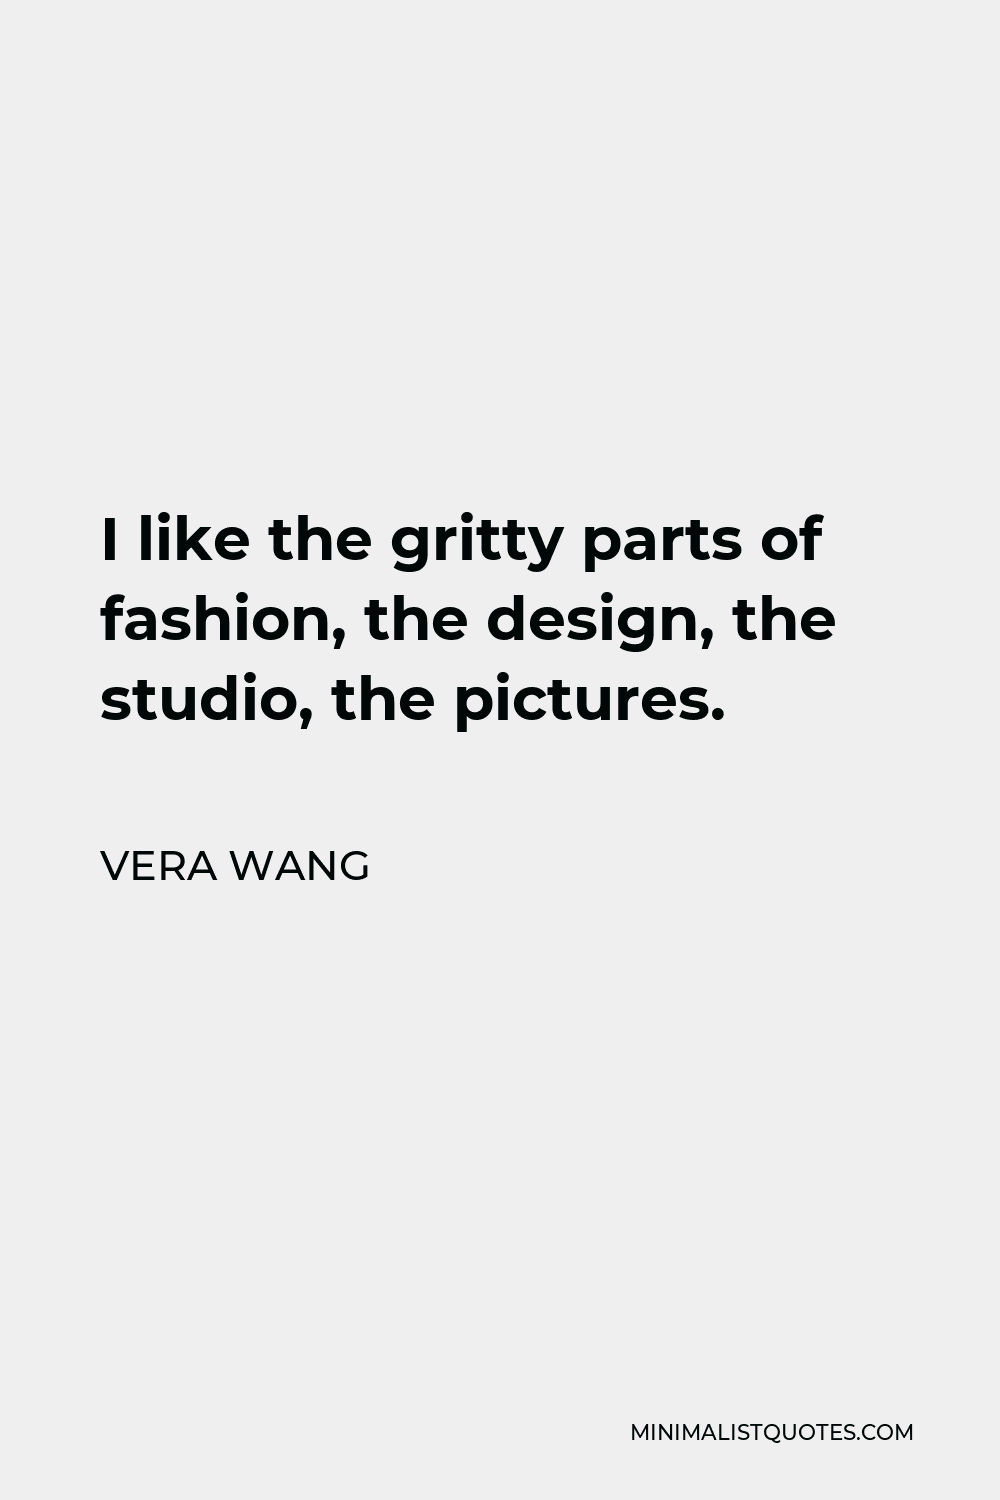 Vera Wang Quote - I like the gritty parts of fashion, the design, the studio, the pictures.